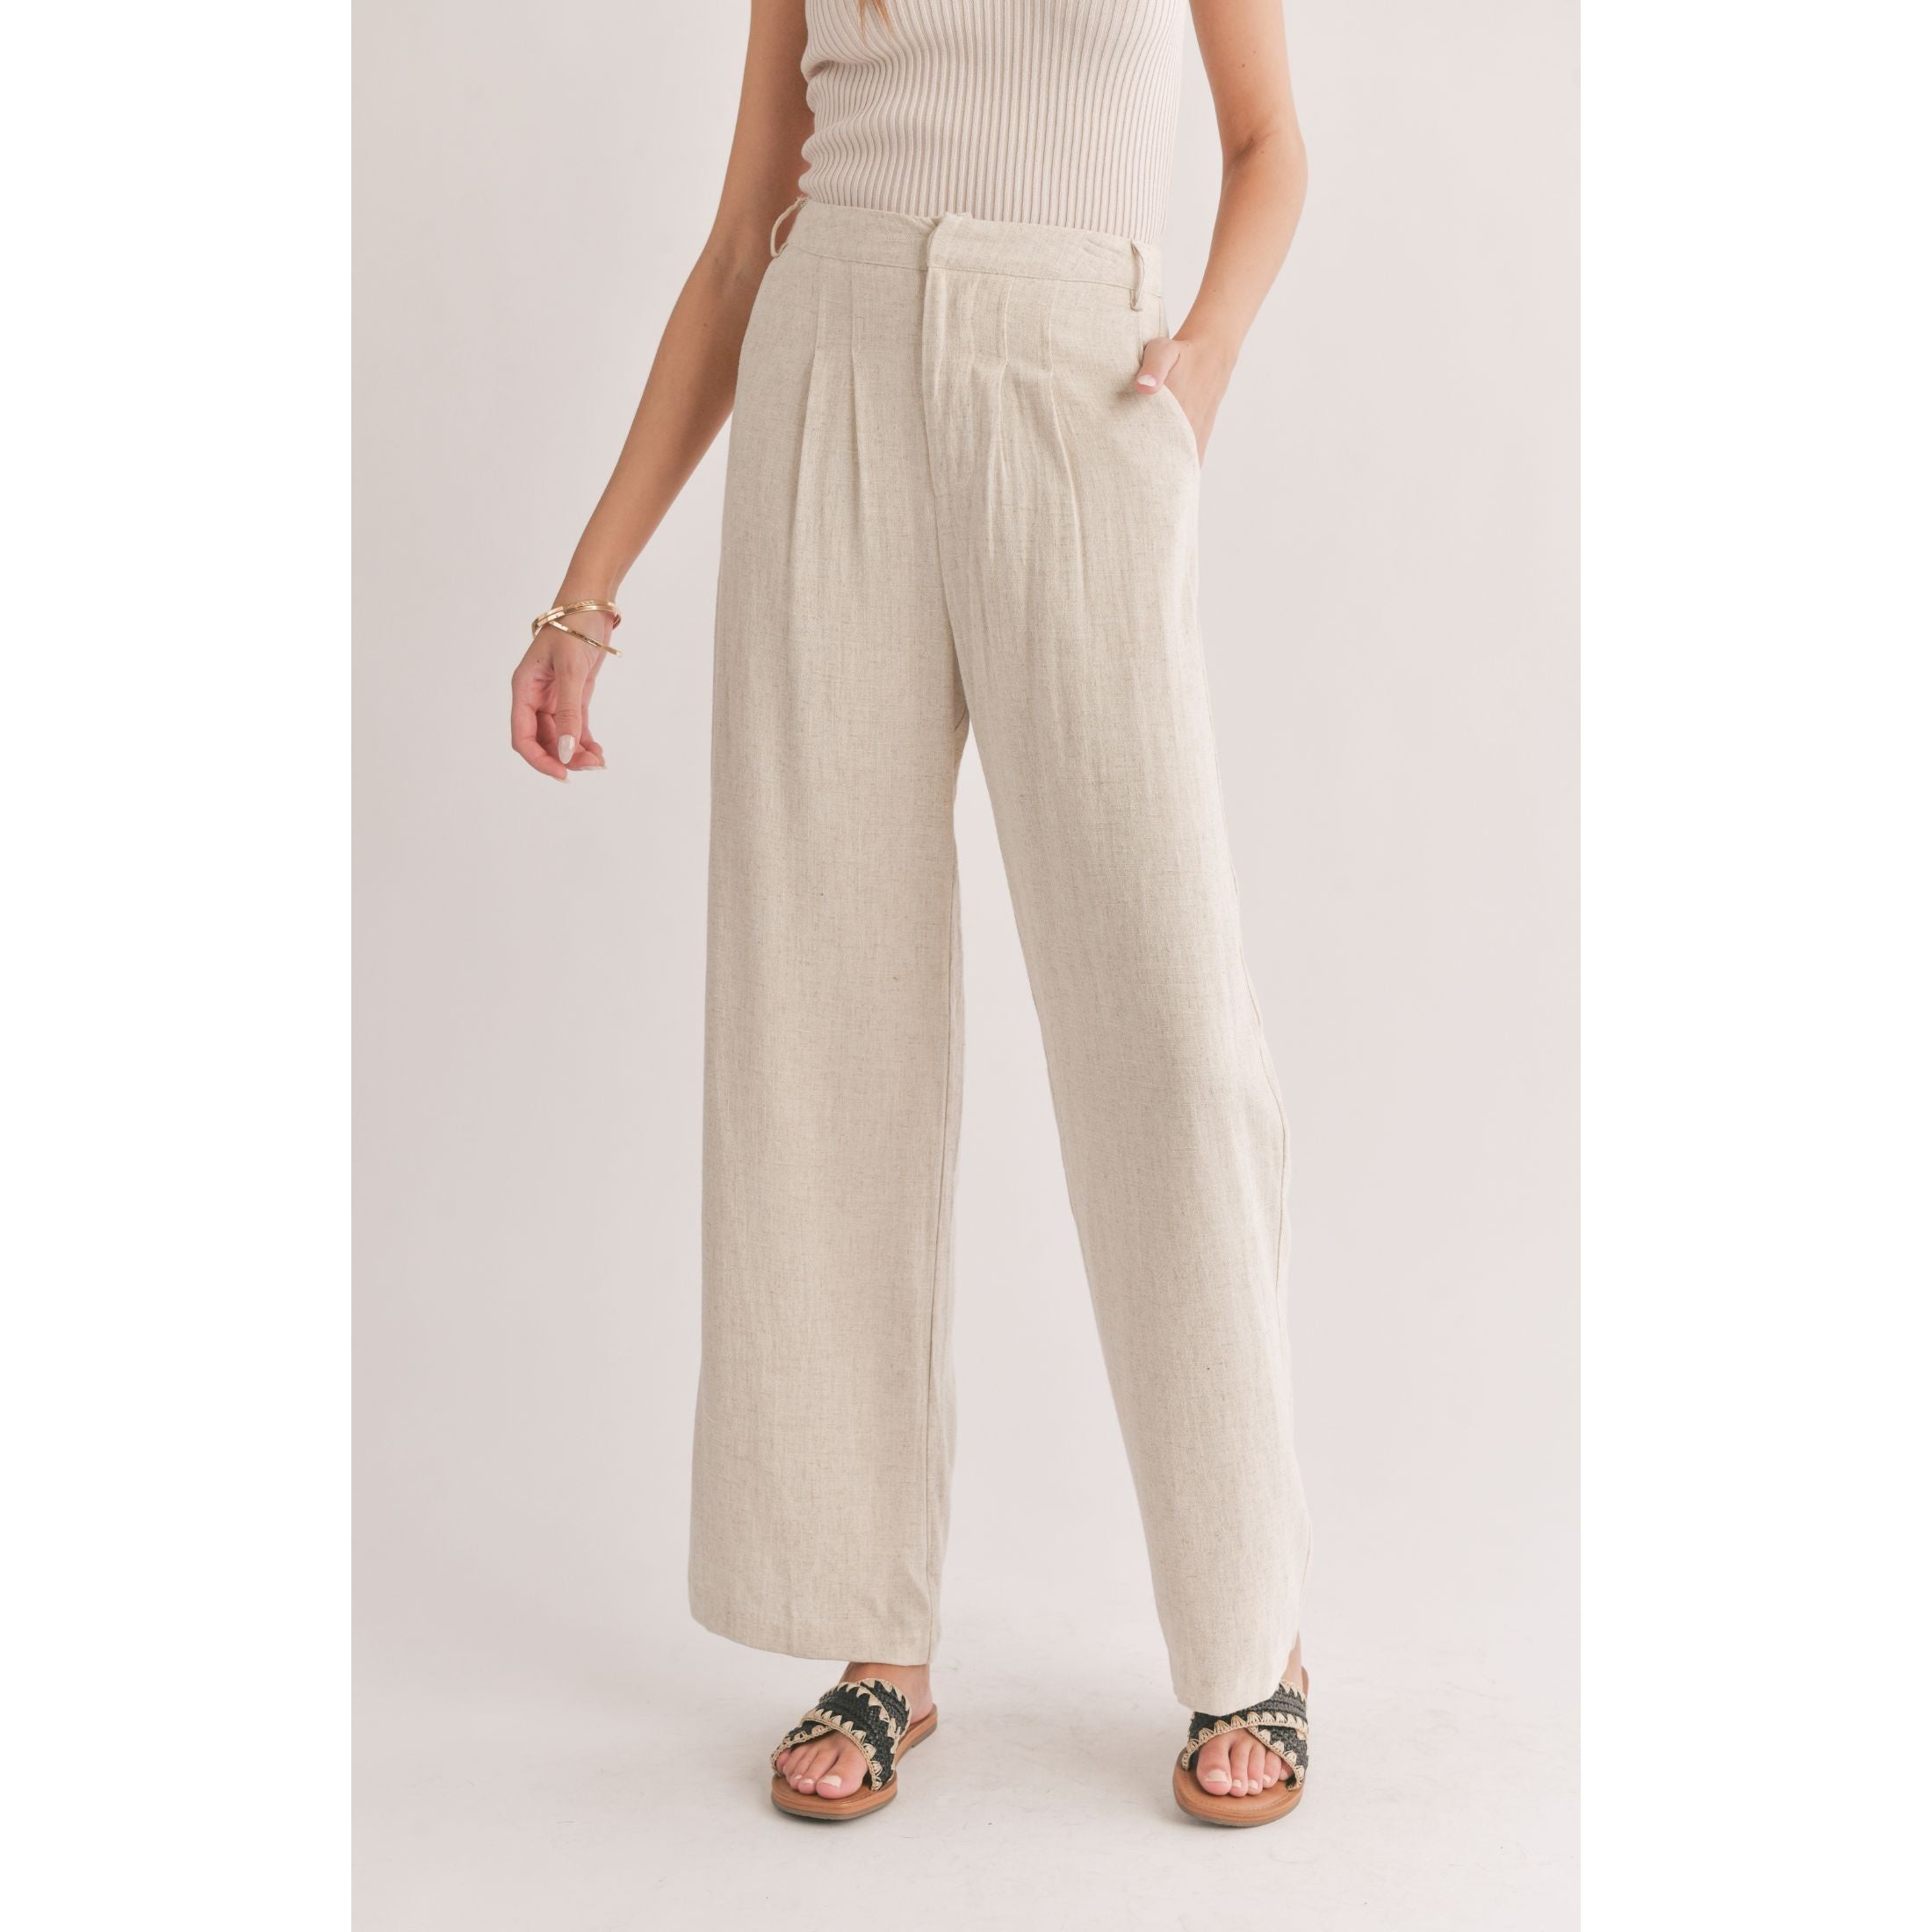 Ladies Trousers, Ladies Navy Blue Cotton Linen Trousers Button Pocket  Pleated Nine Points Straight Pants Summer Baggy Wide Leg Trousers Back  Elastic High Waist Flared Pants For Women Work Leisure Be :